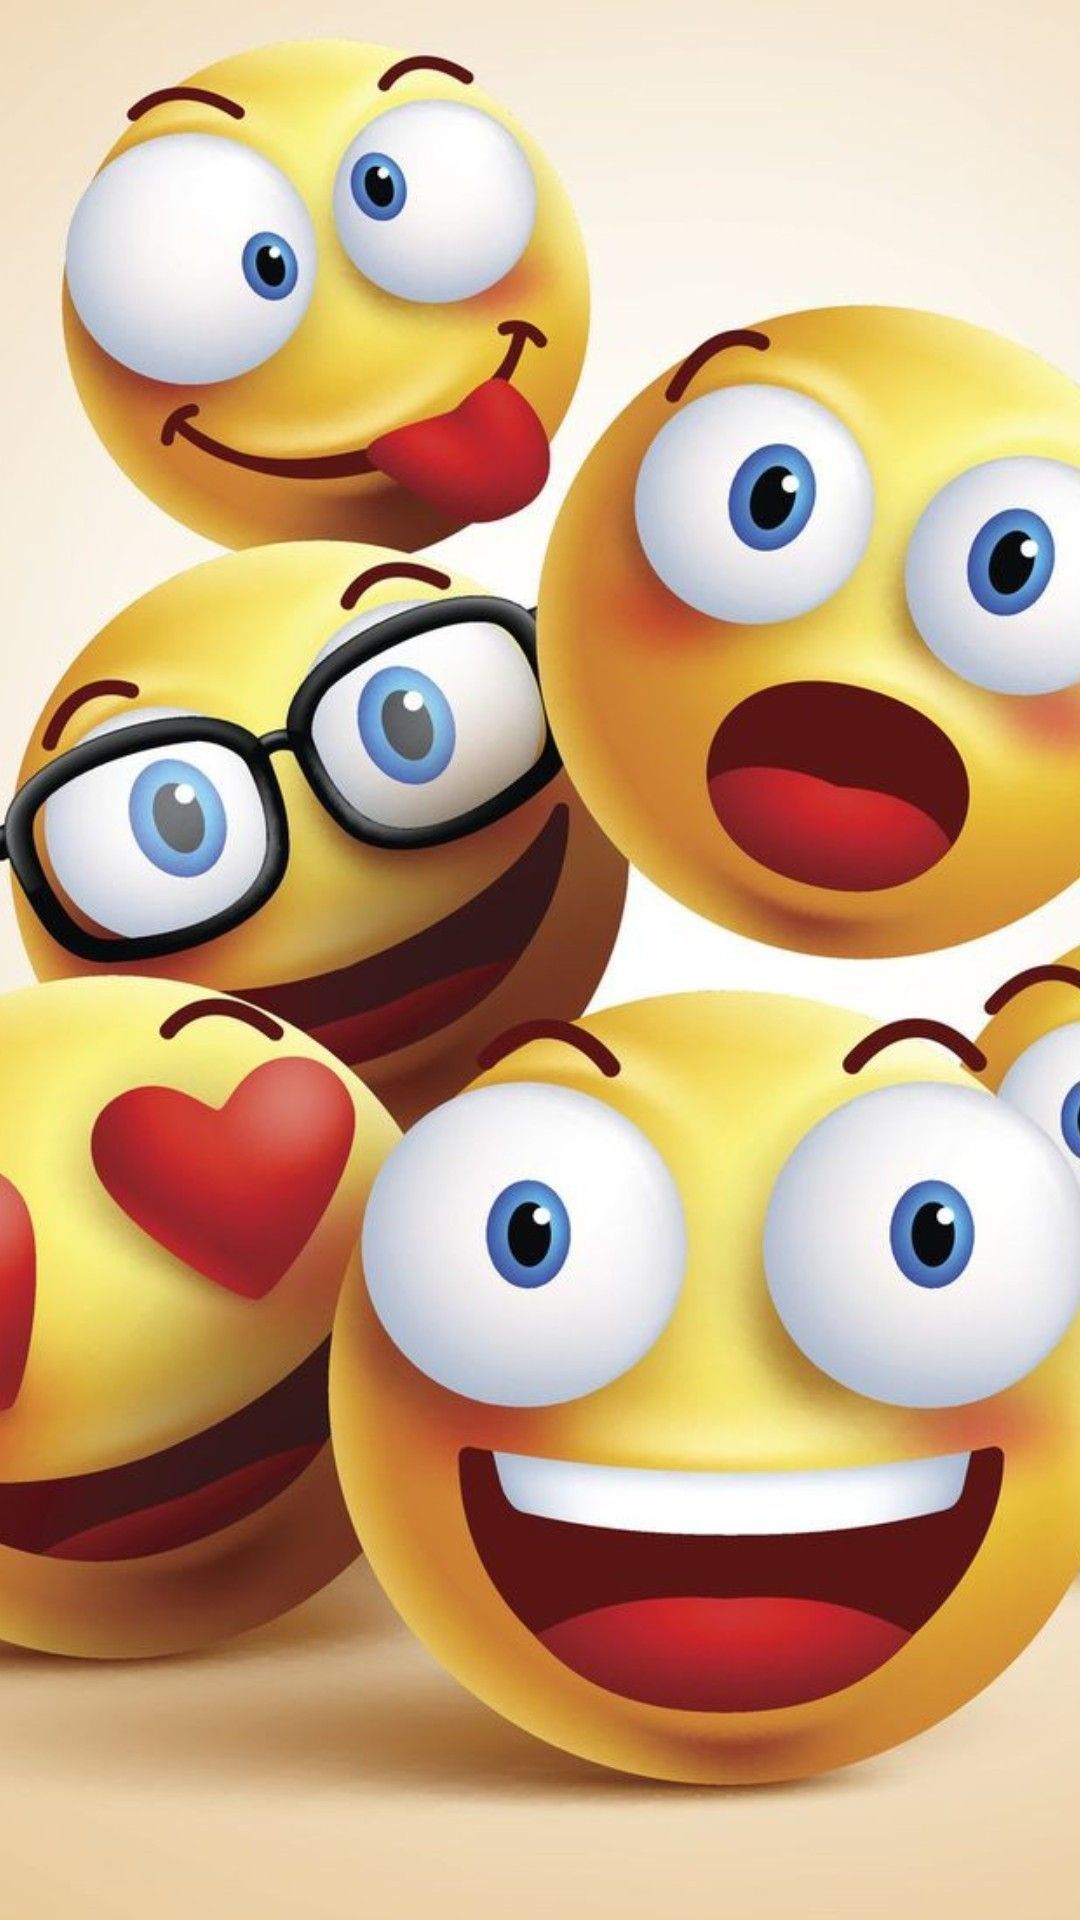 Emoji Background Hupages Download iPhone Wallpaper. Emoji background, Emoji wallpaper, Cute emoji wallpaper